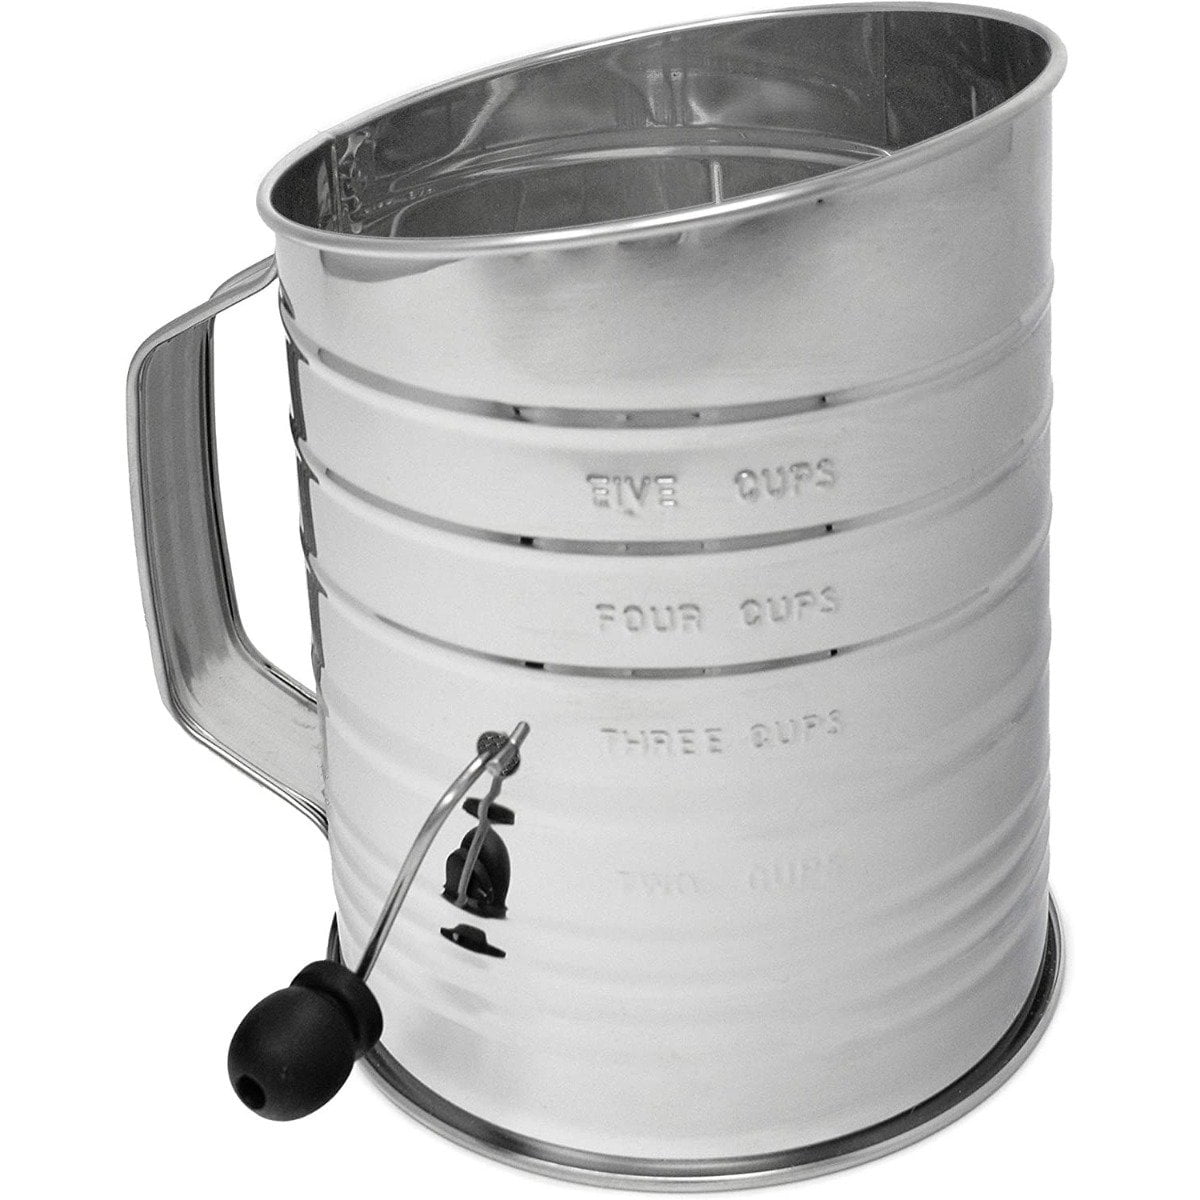 Nifty battery-powered flour sifter with a five cup capacity - R120